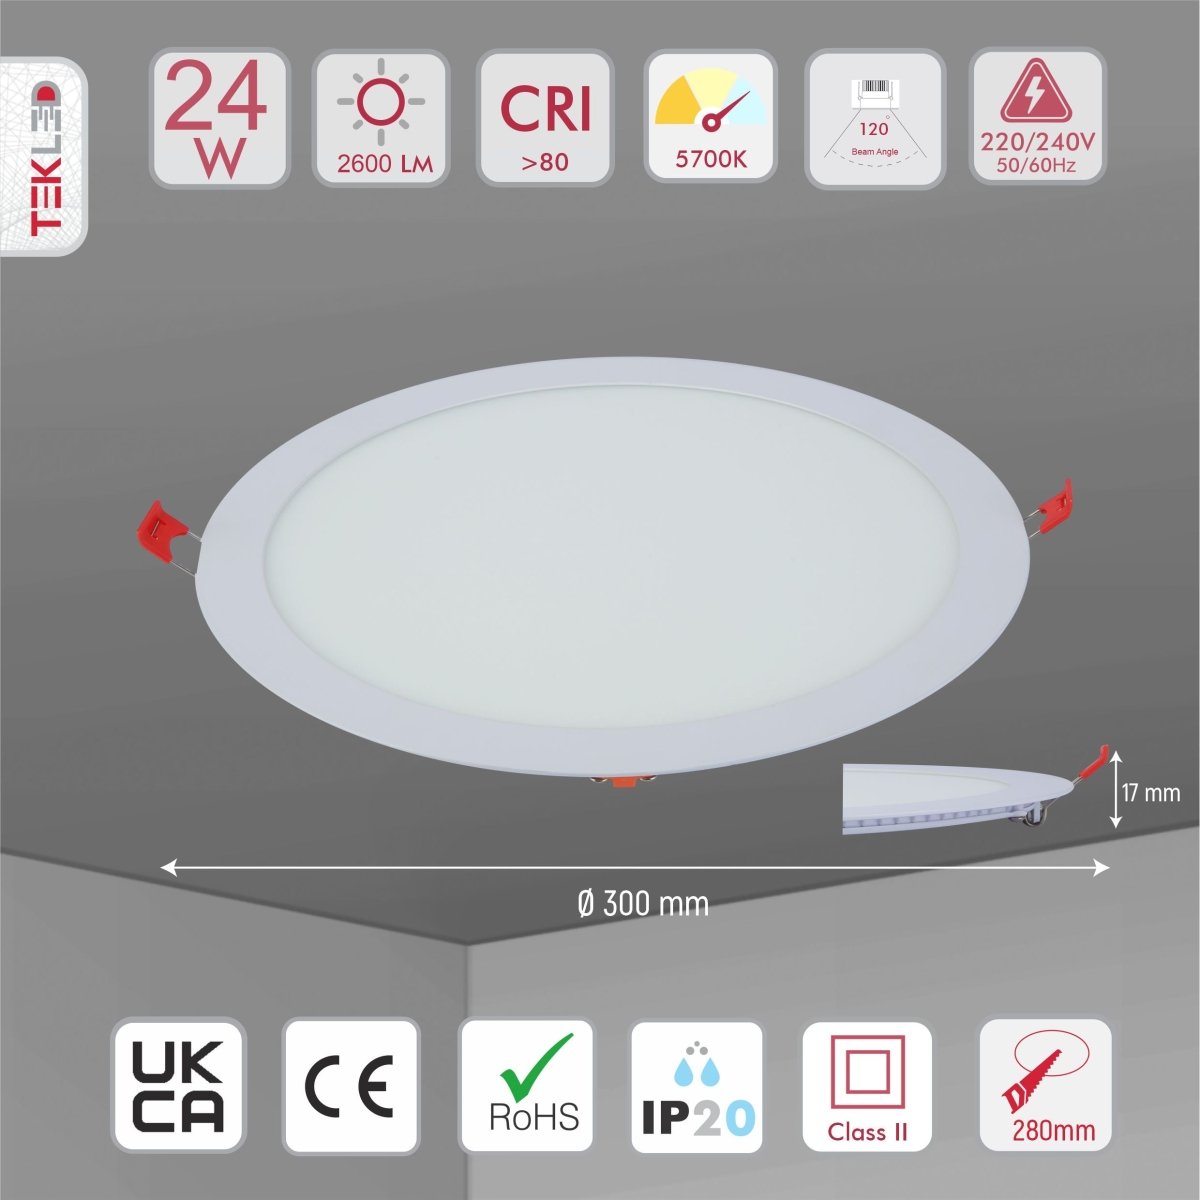 Product dimensions of downlight led round slim panel light 24w 5700k cool daylight d300mm